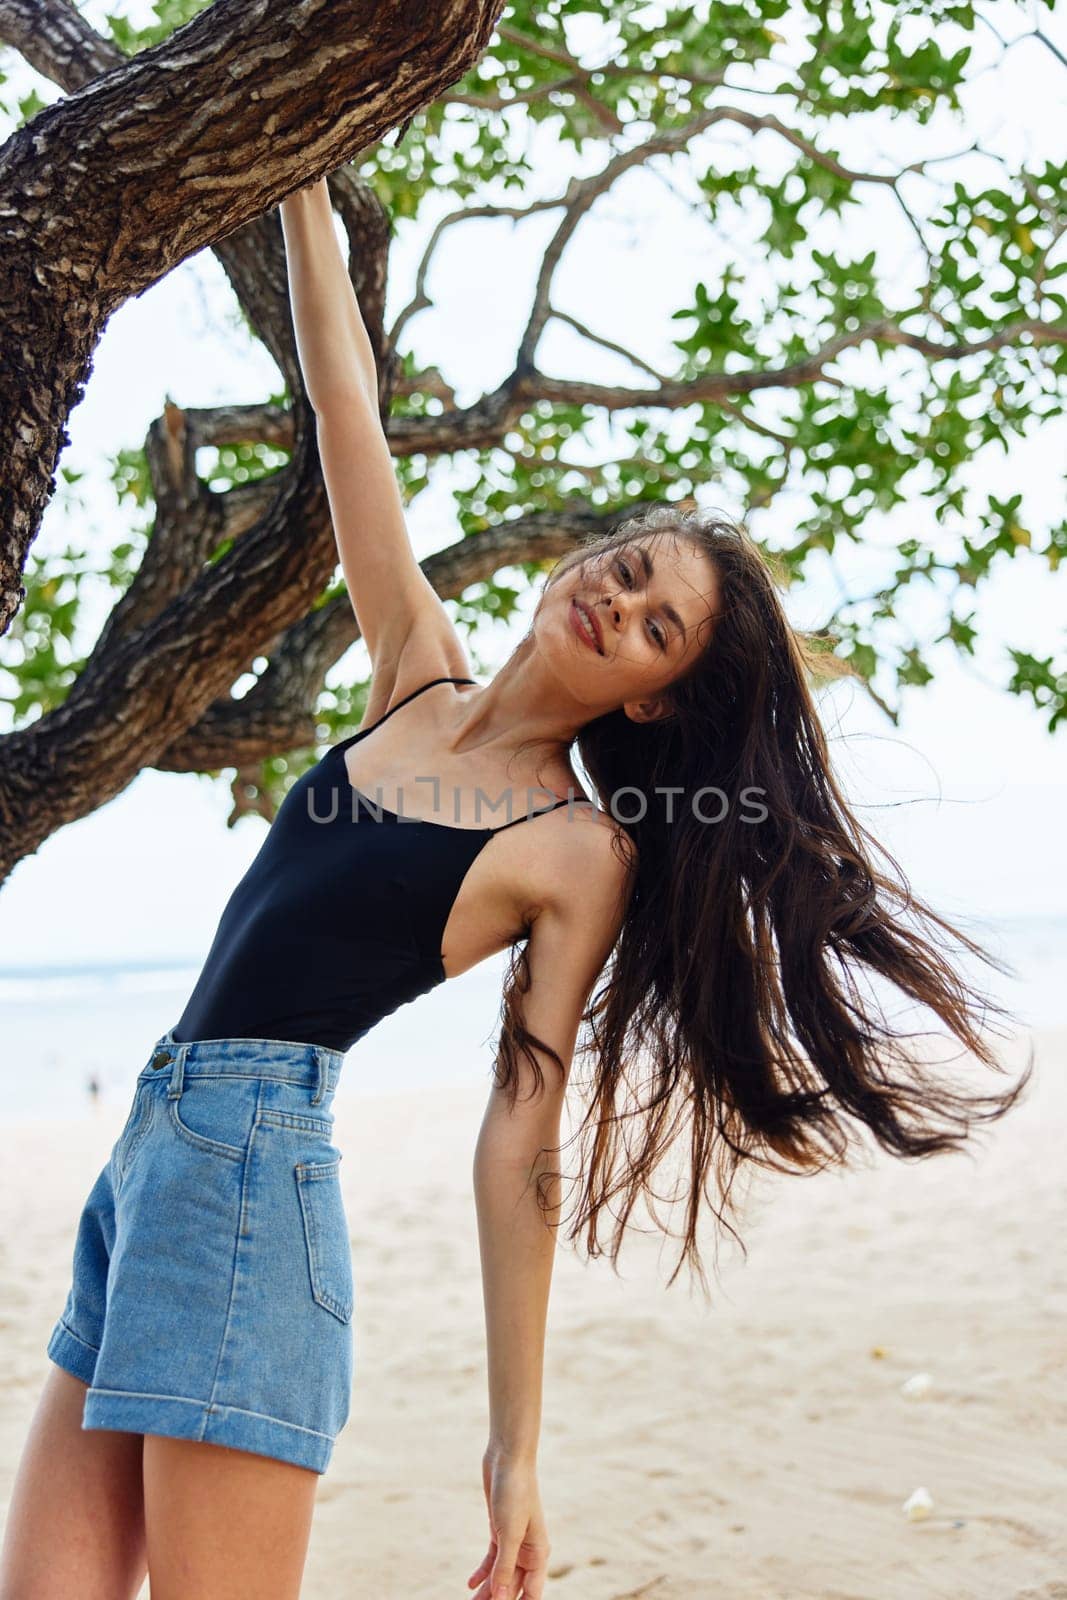 sky woman person nature tree hanging vacation relax lifestyle sea smiling by SHOTPRIME